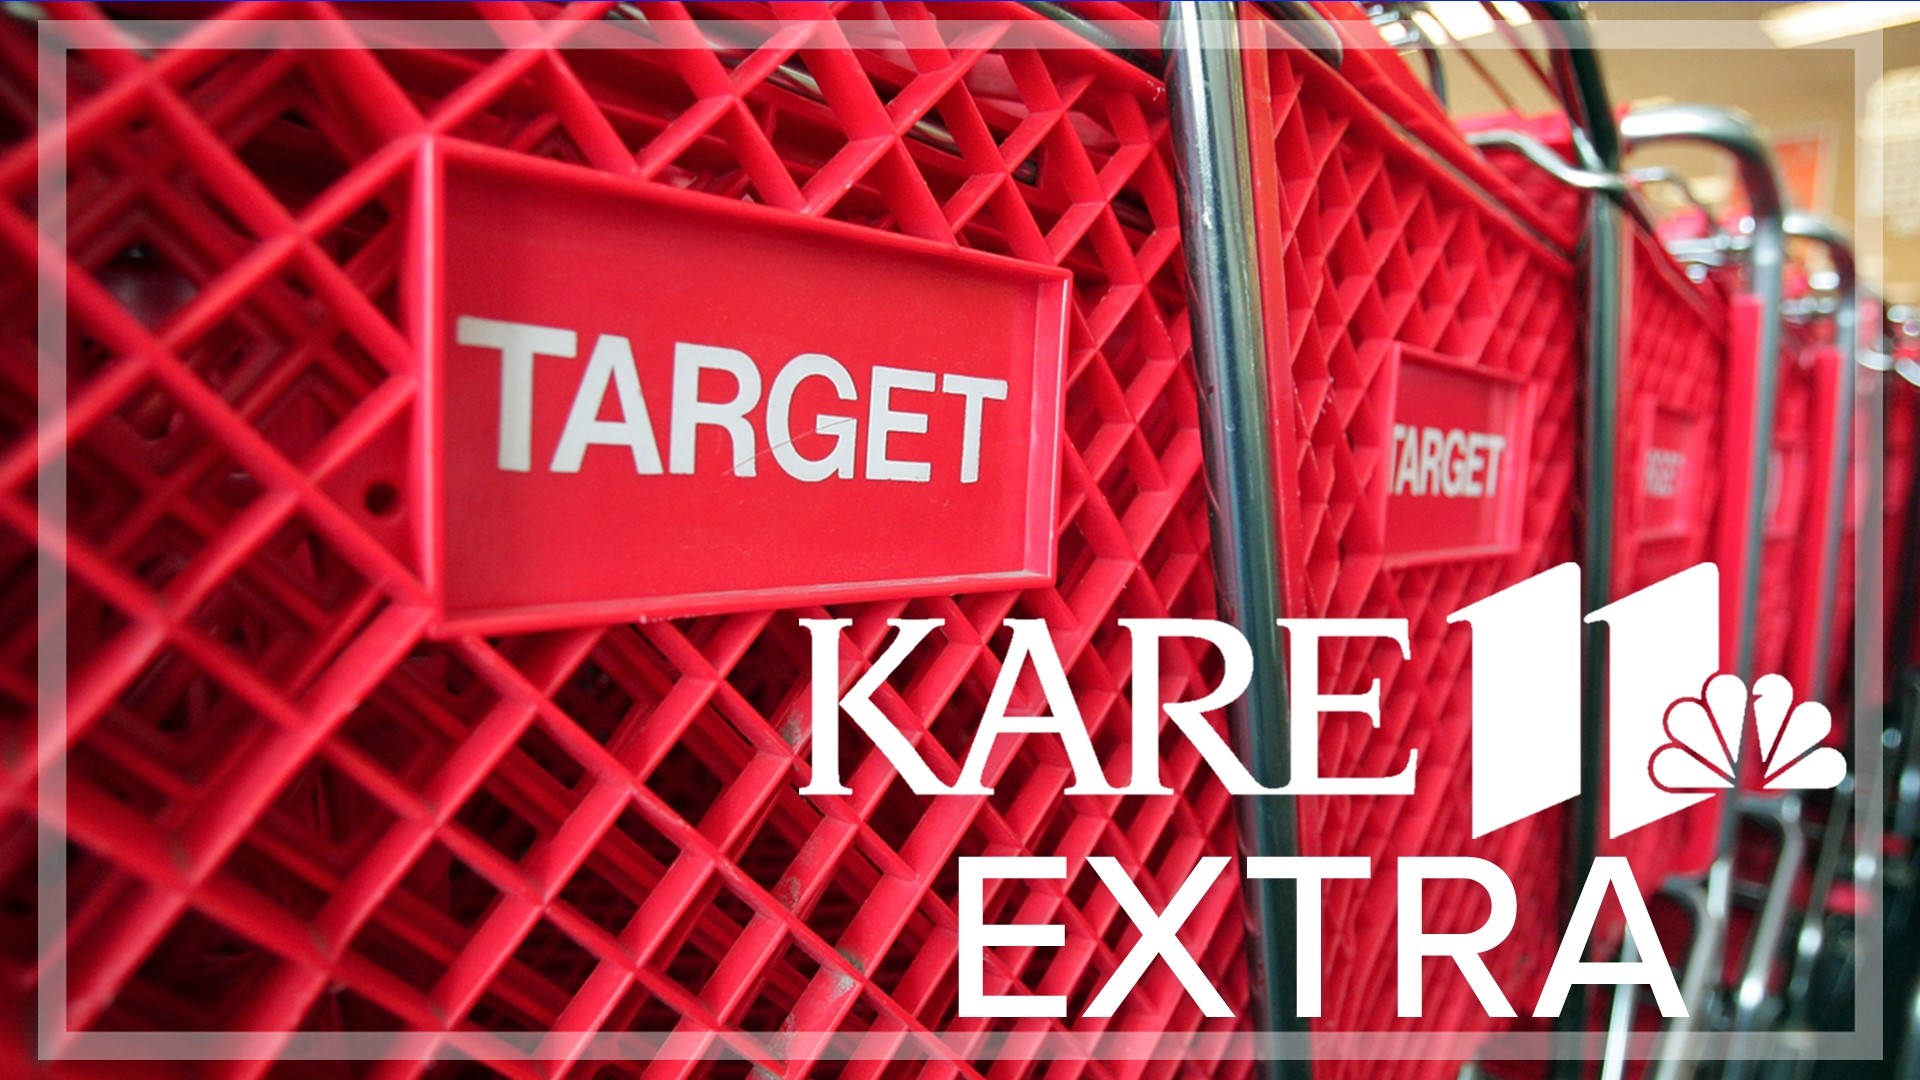 The lawsuit and judgement come after a KARE 11 investigation uncovered certain prices in the Target app switching when customers walked into the store.